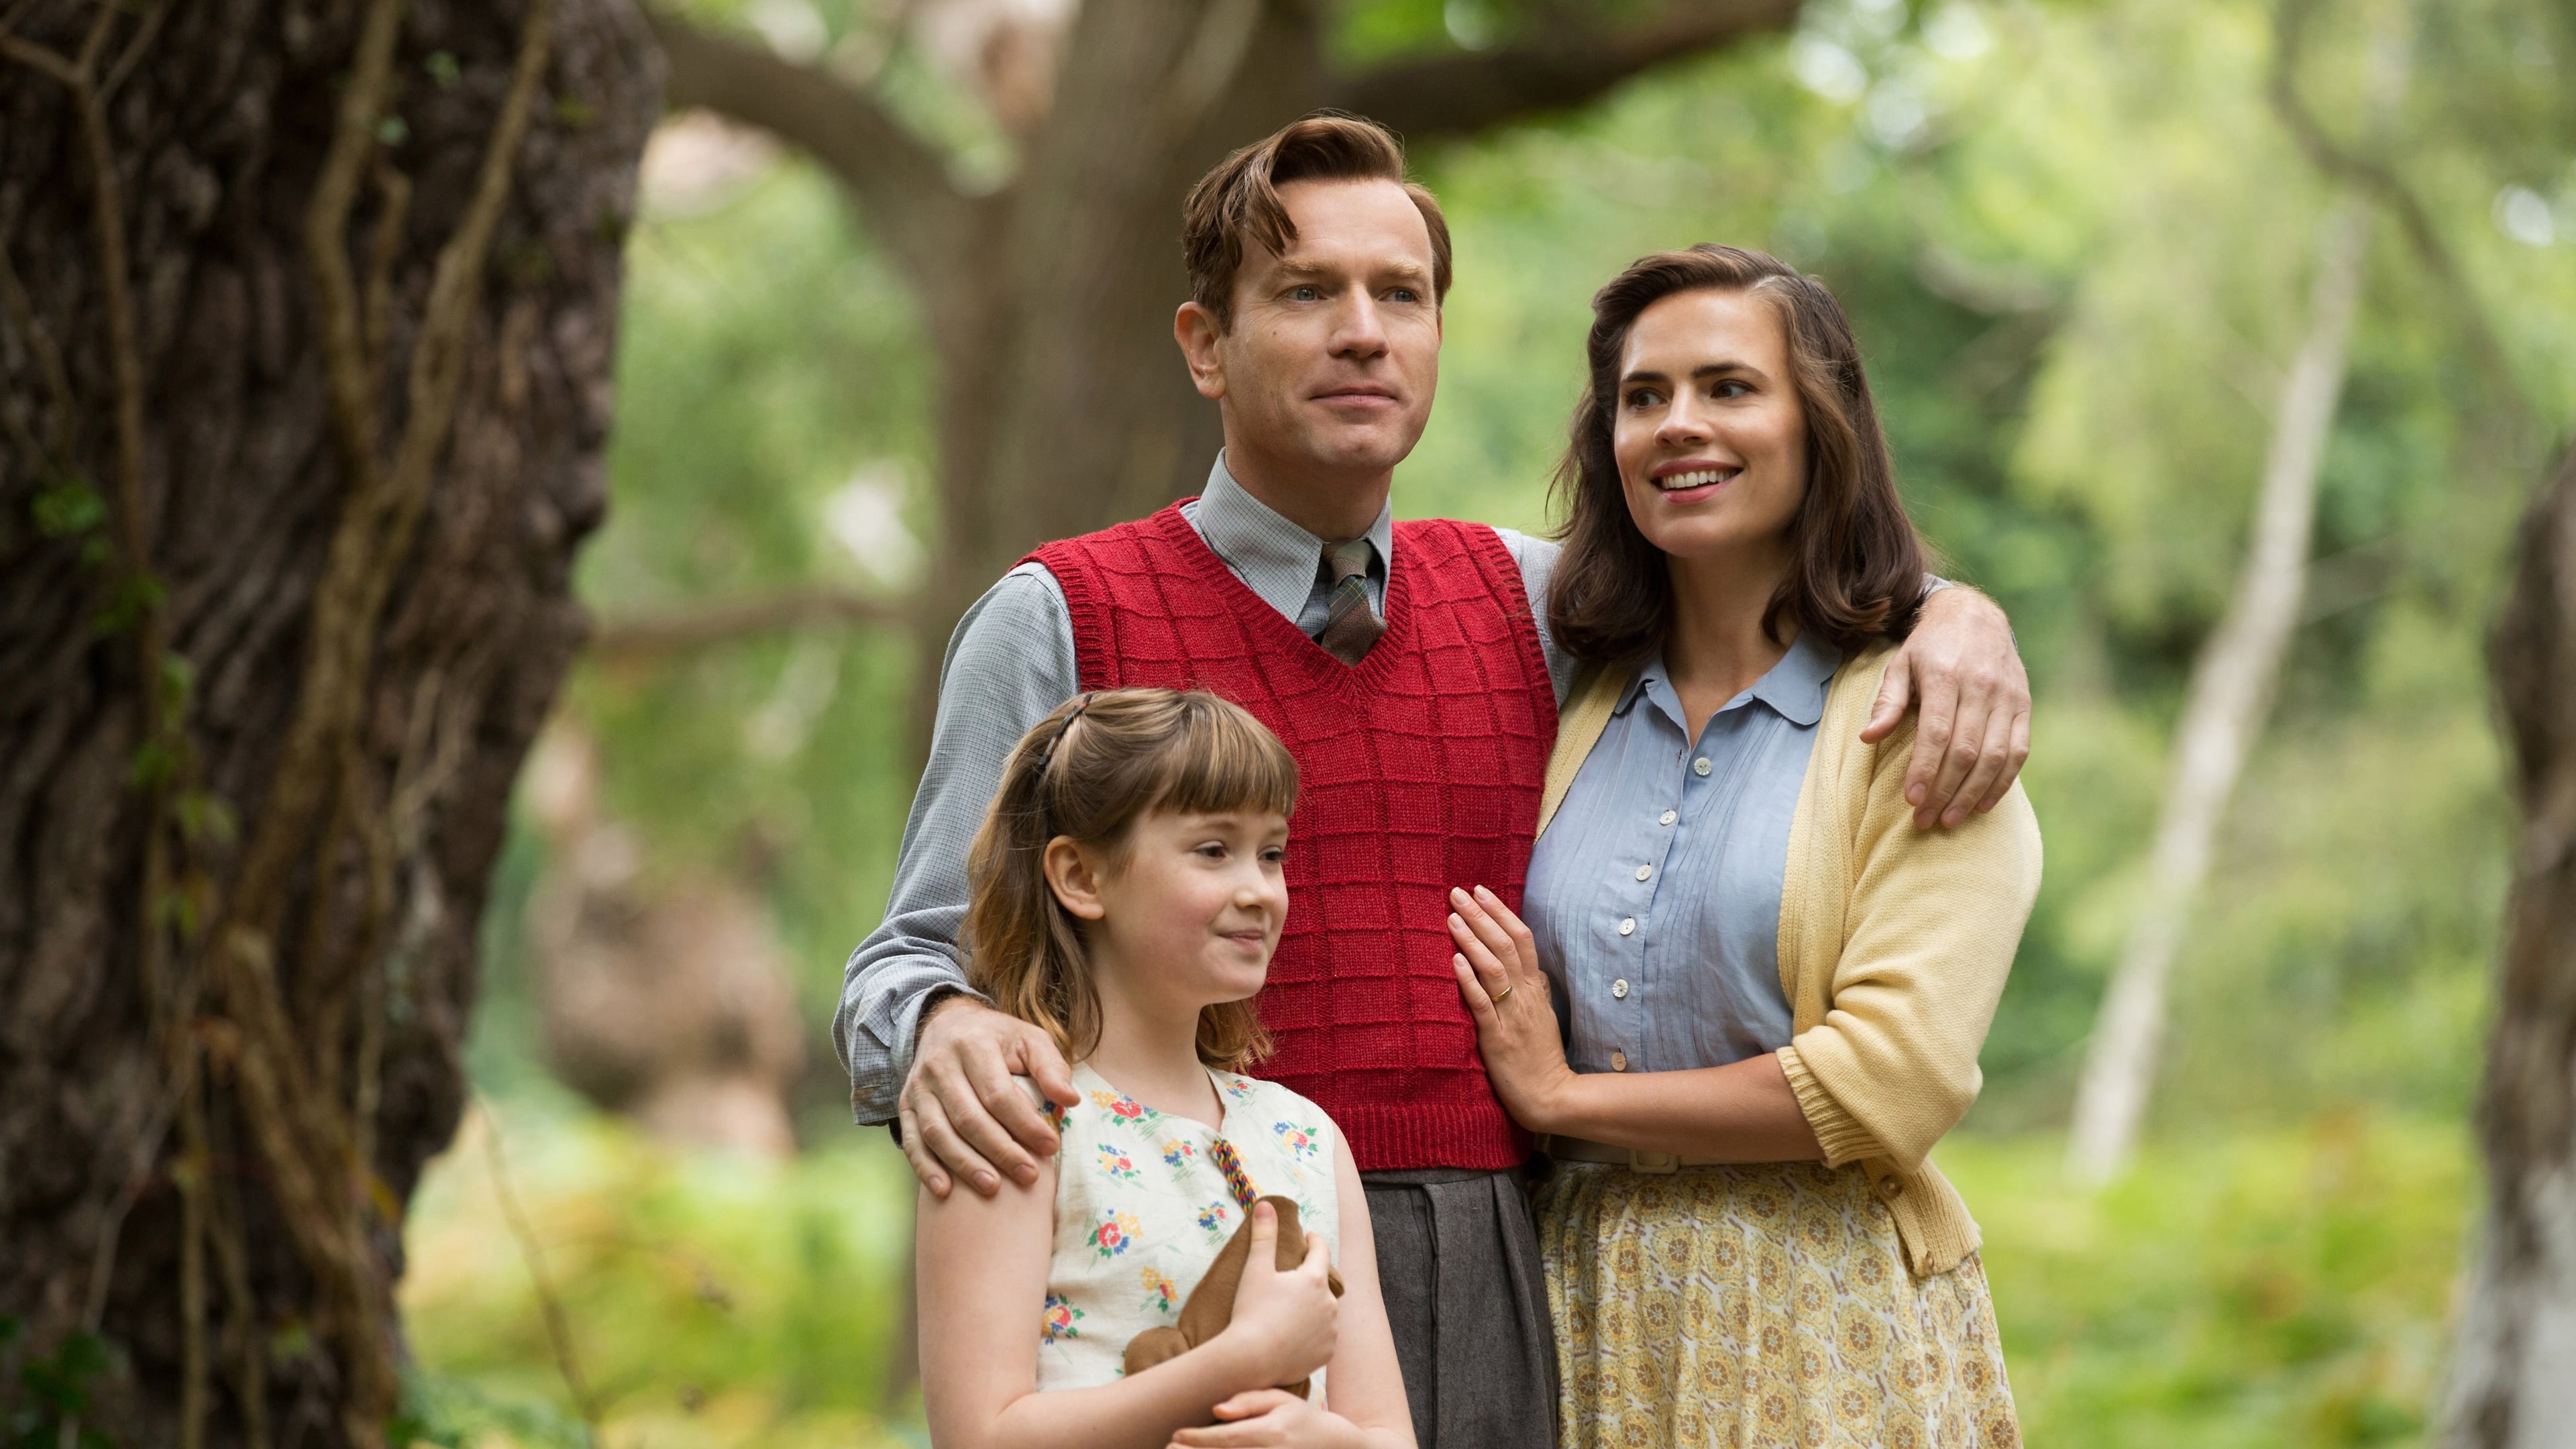 Christopher Robin (Movie): Hayley Atwell as Evelyn Robin, Christopher's wife. 3840x2160 4K Wallpaper.